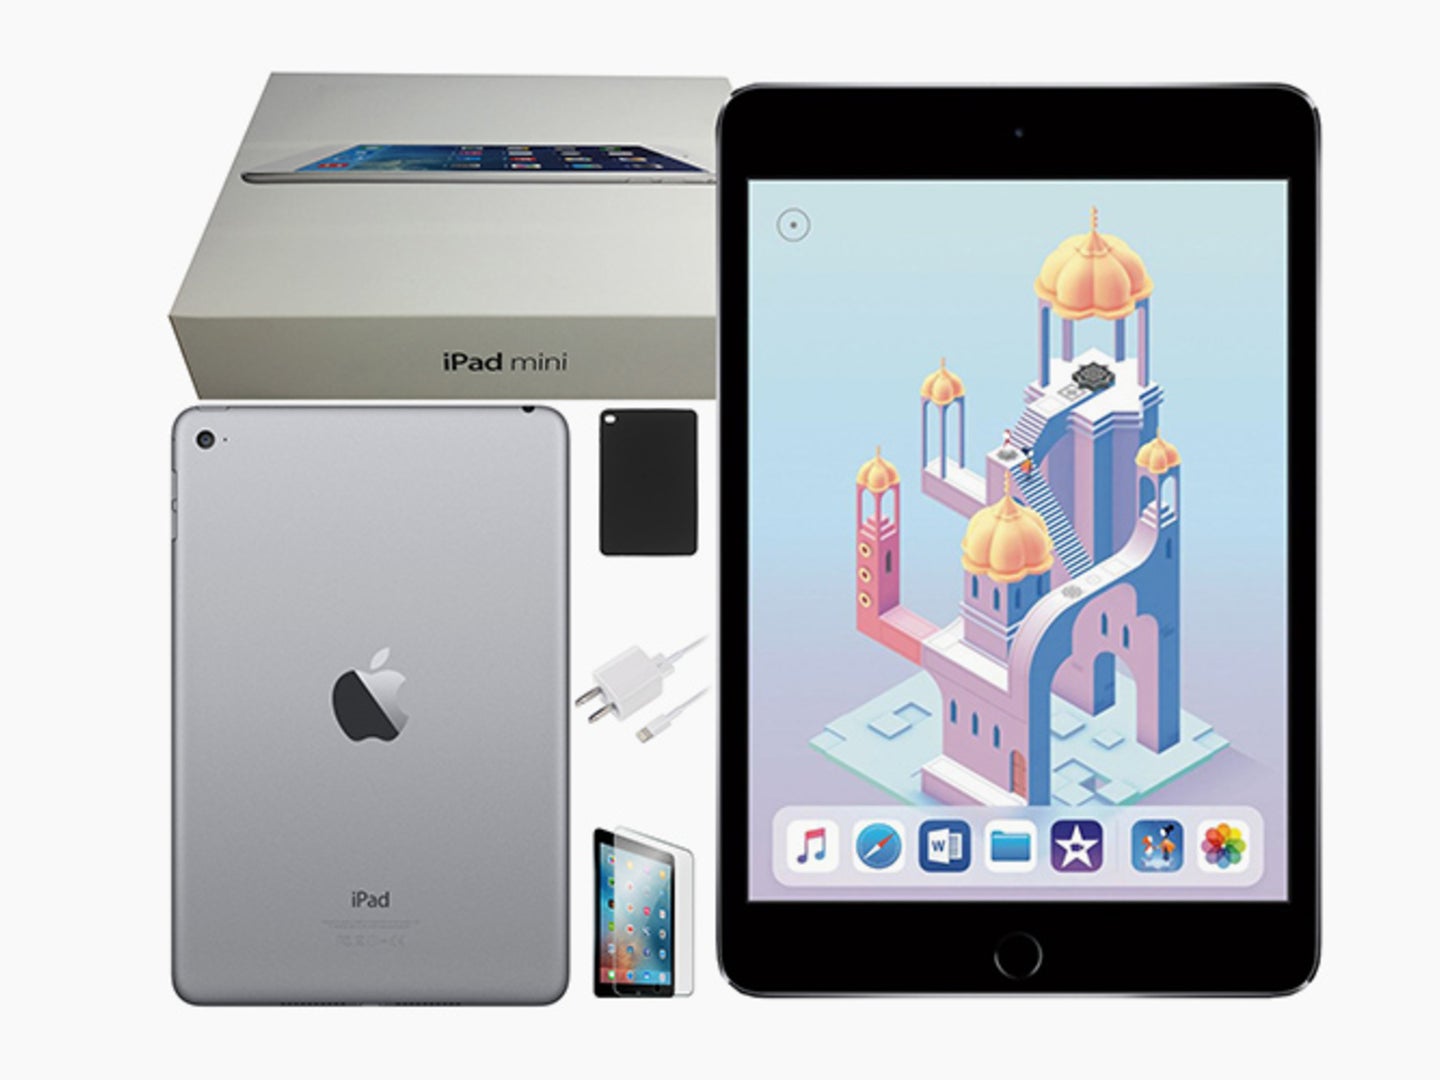 An iPad mini and accessories on a white background